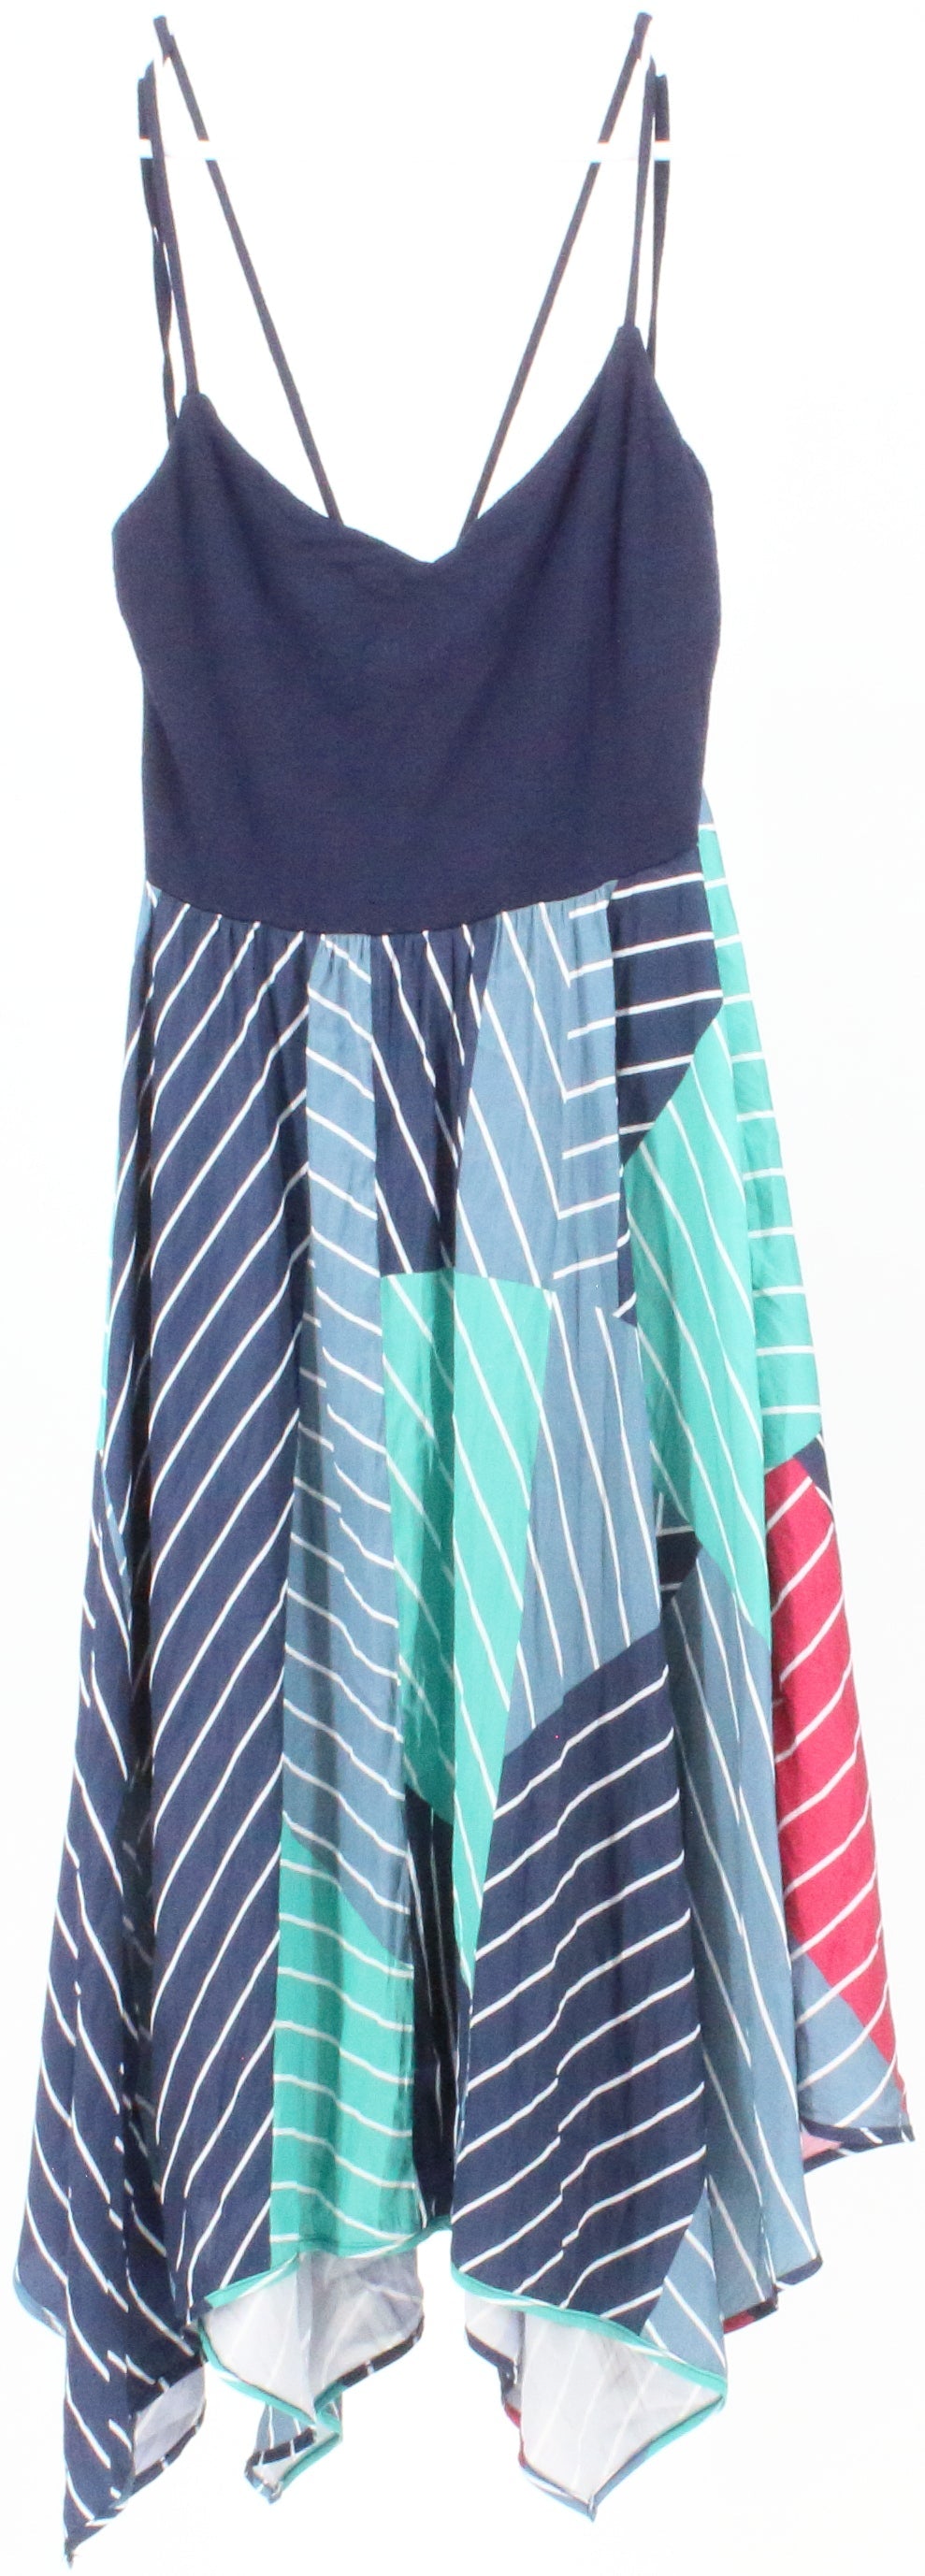 Gap Navy Blue and Multicolor Striped Dress